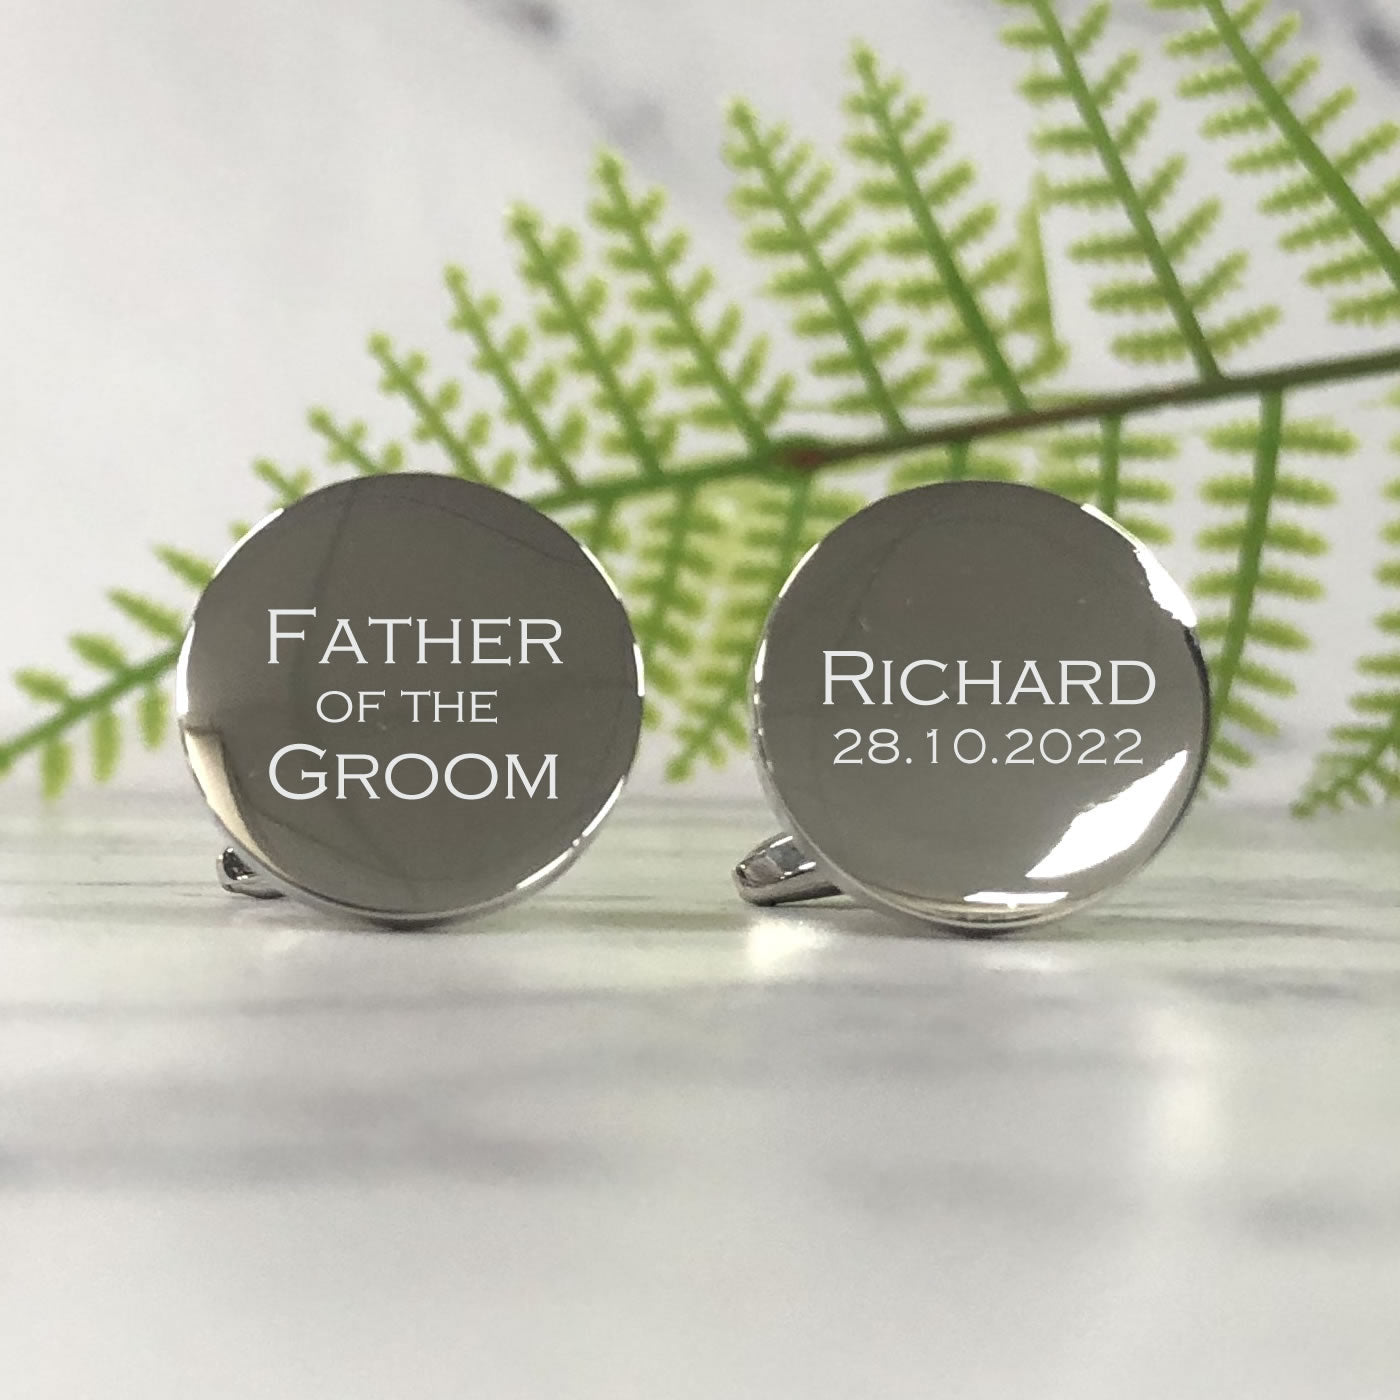 Personalised Round Wedding Cufflinks - Father Of The Groom